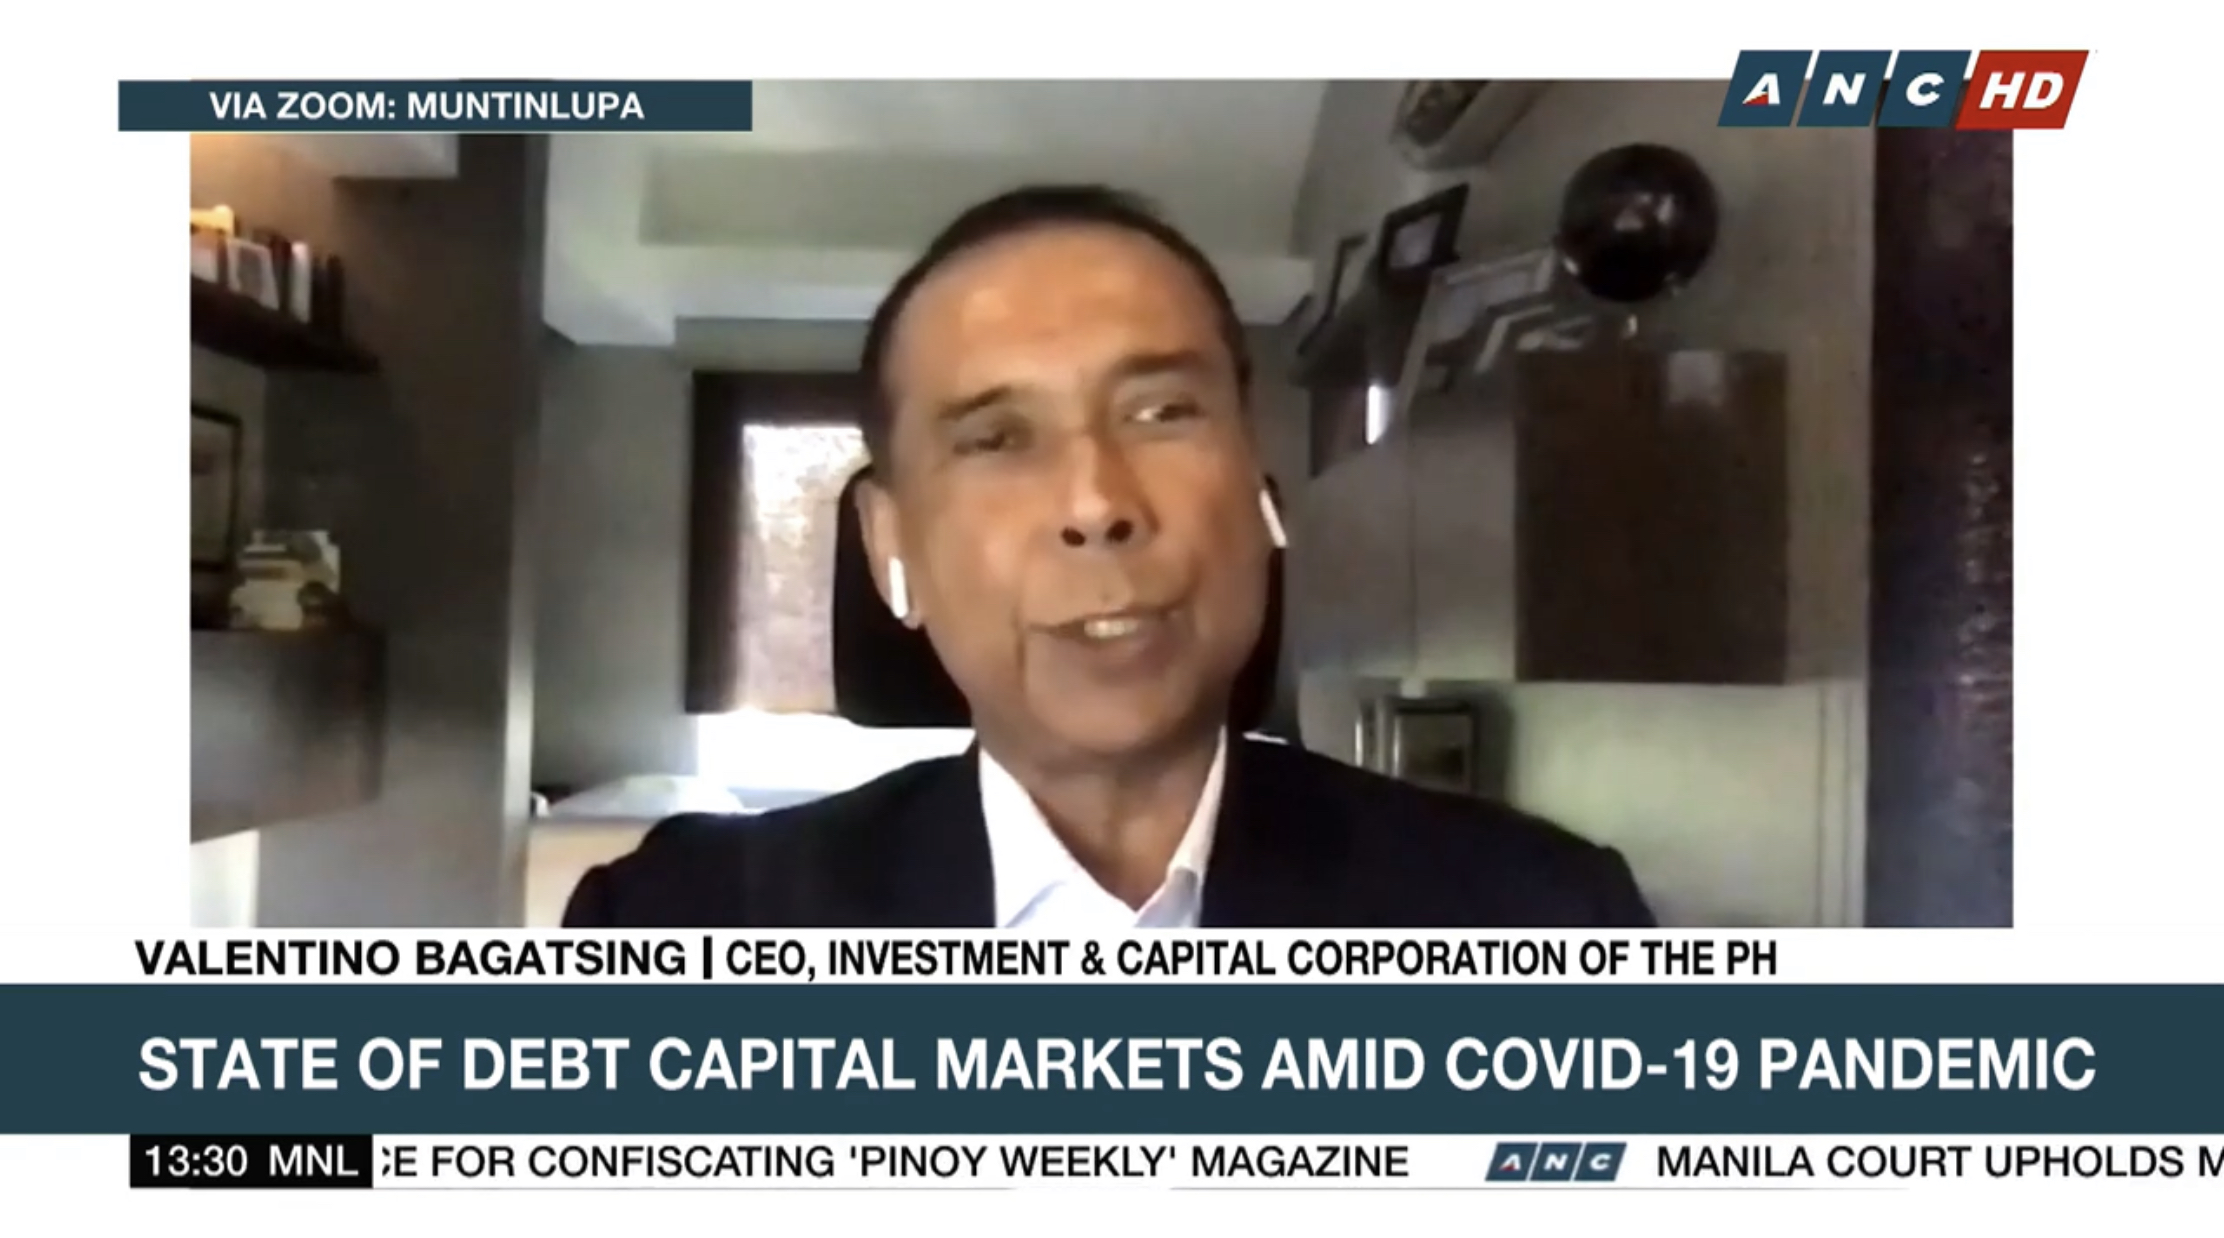 ICCP on State of Capital Debt Markets Amid Covid-19 Pandemic, Valentino Bagatsing, Val Bagatsing interview with ANC